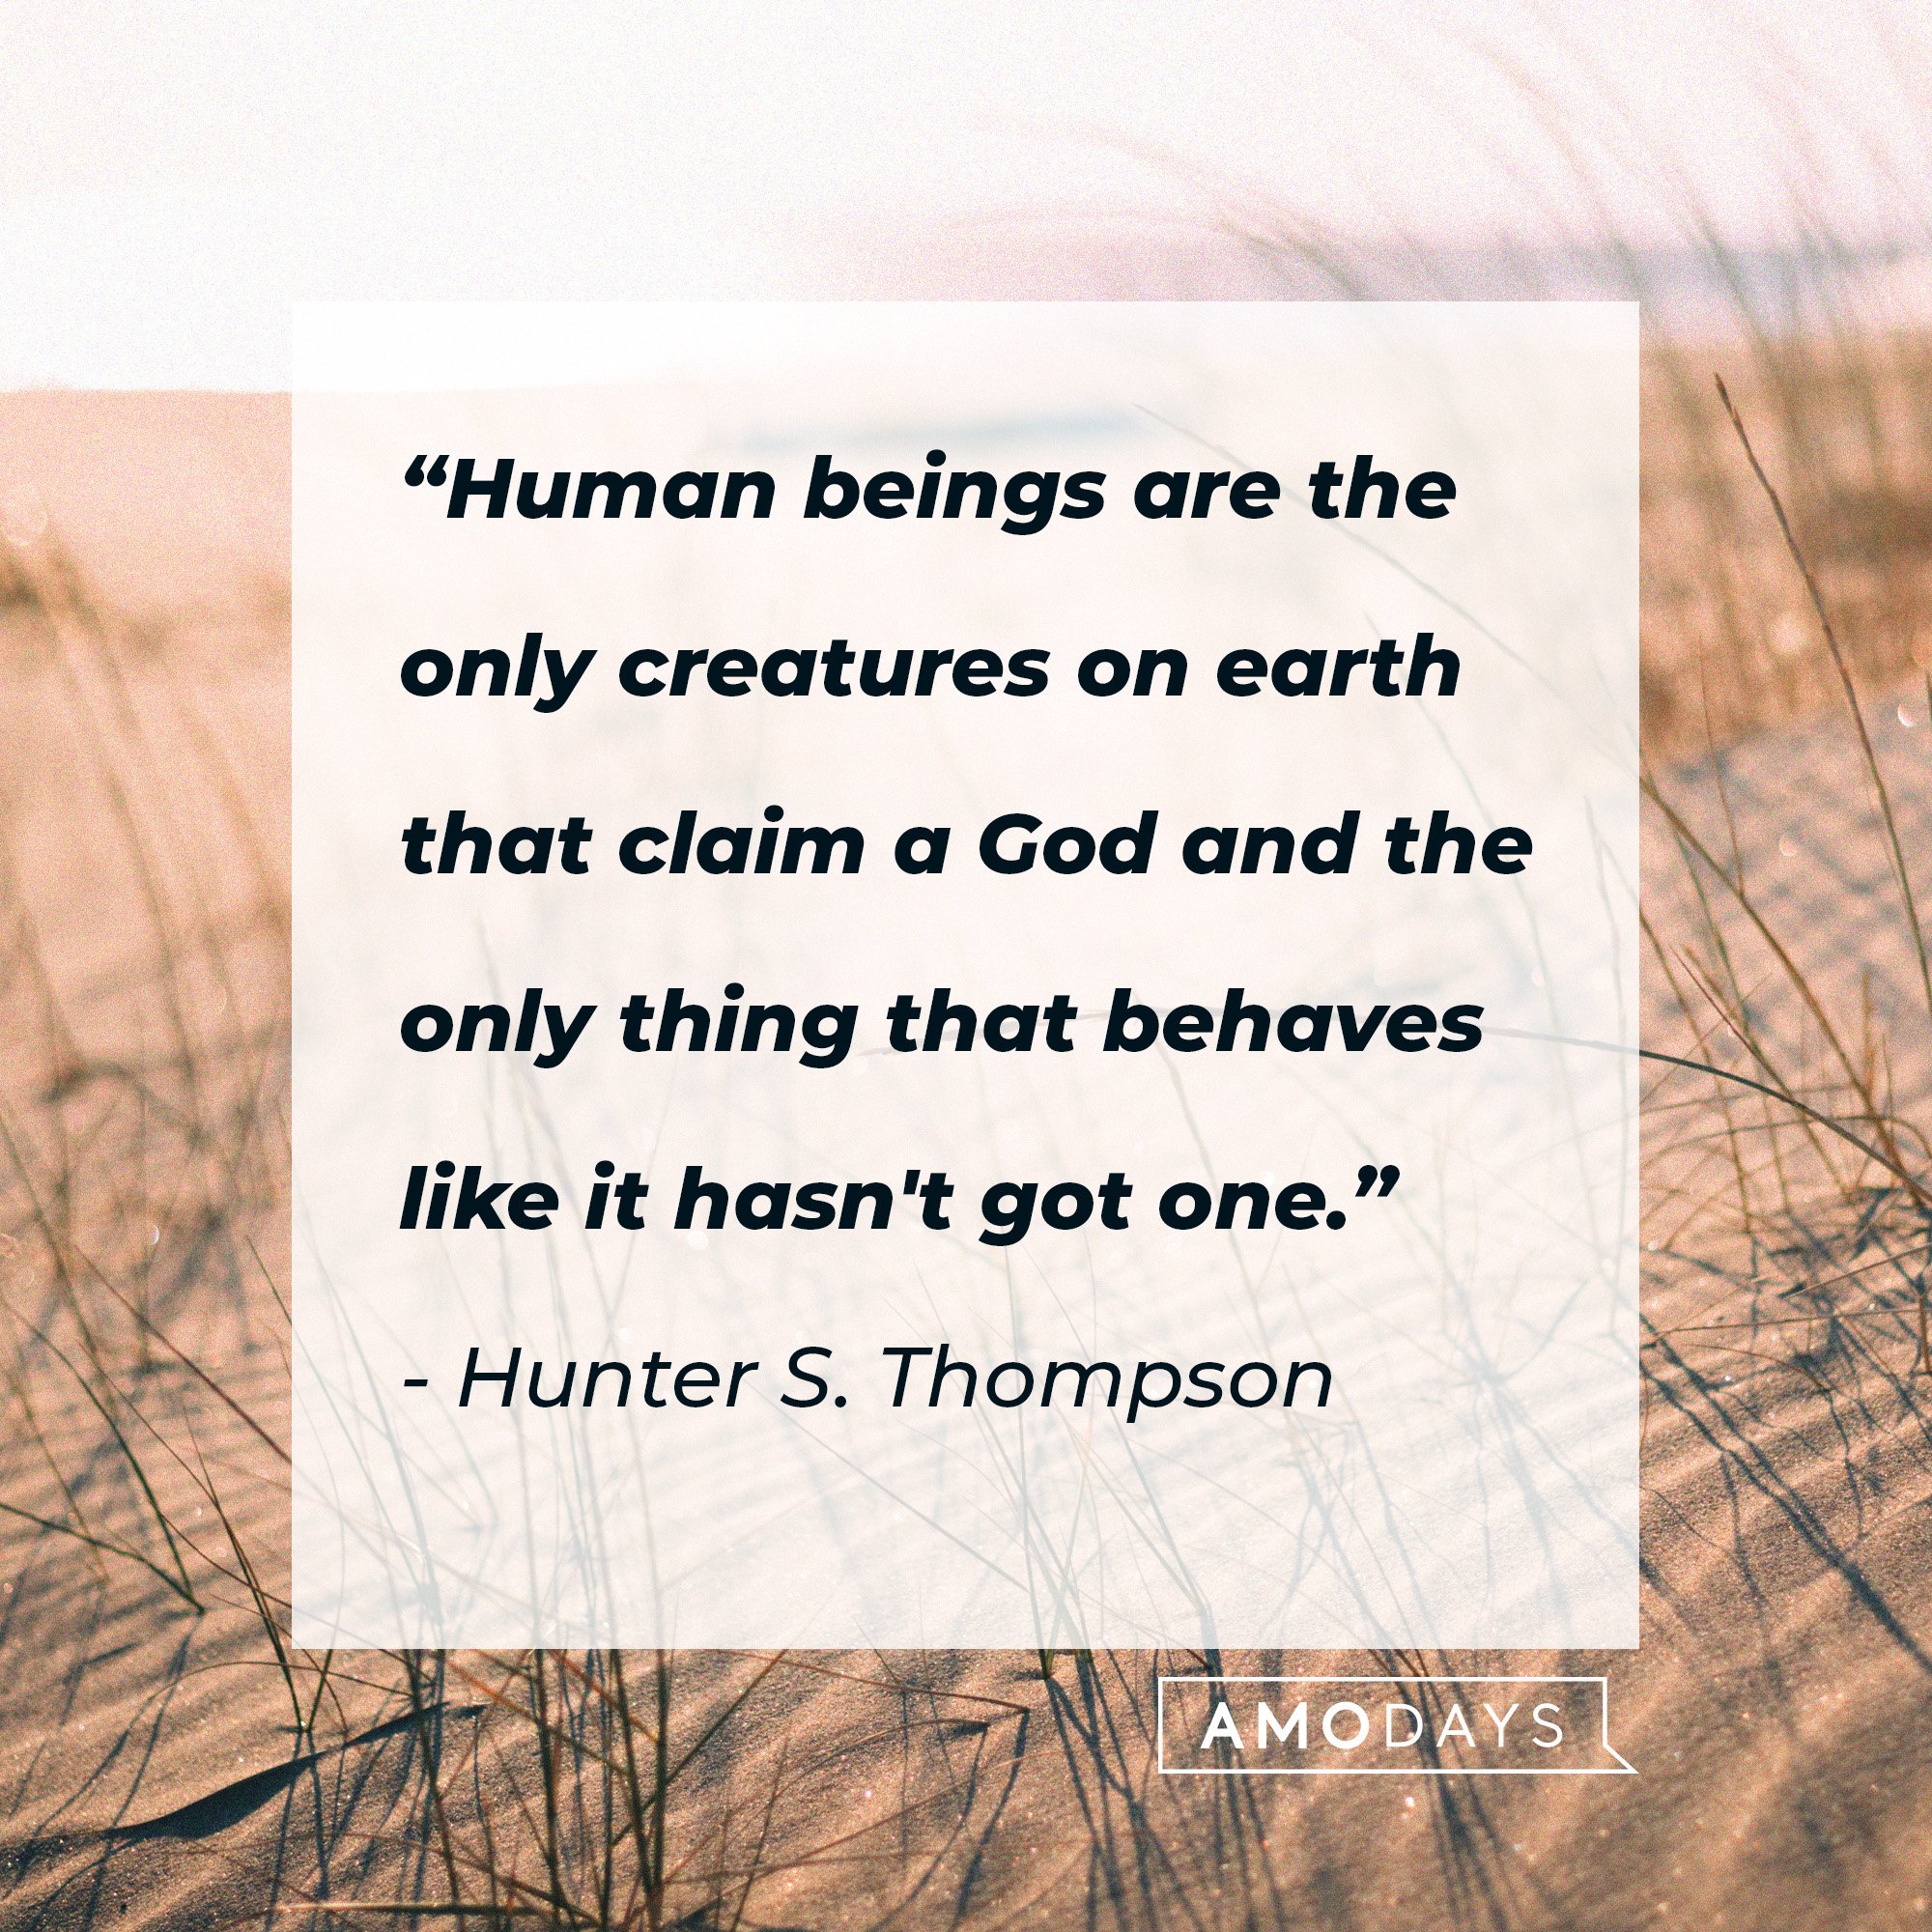 Hunter S. Thompson’s quote: “Human beings are the only creatures on earth that claim a God and the only thing that behaves like it hasn't got one.” | Image: AmoDays